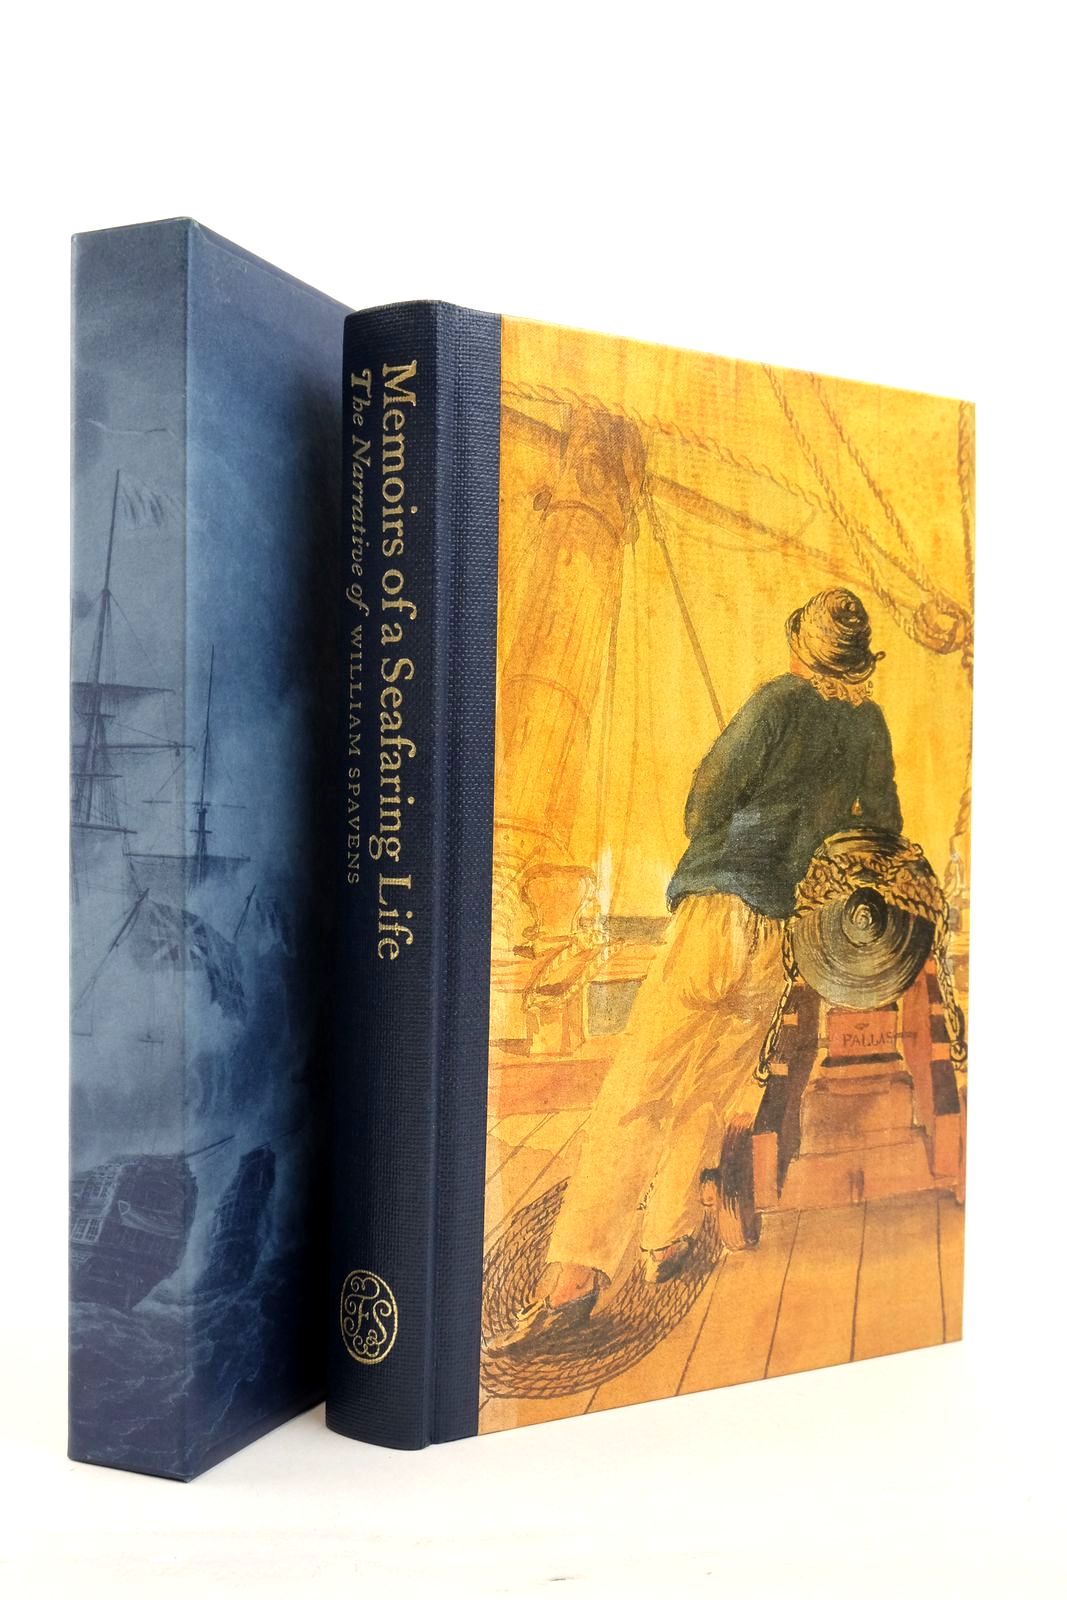 Photo of MEMOIRS OF A SEAFARING LIFE written by Spavens, William Rodger, N.A.M. published by Folio Society (STOCK CODE: 2138397)  for sale by Stella & Rose's Books